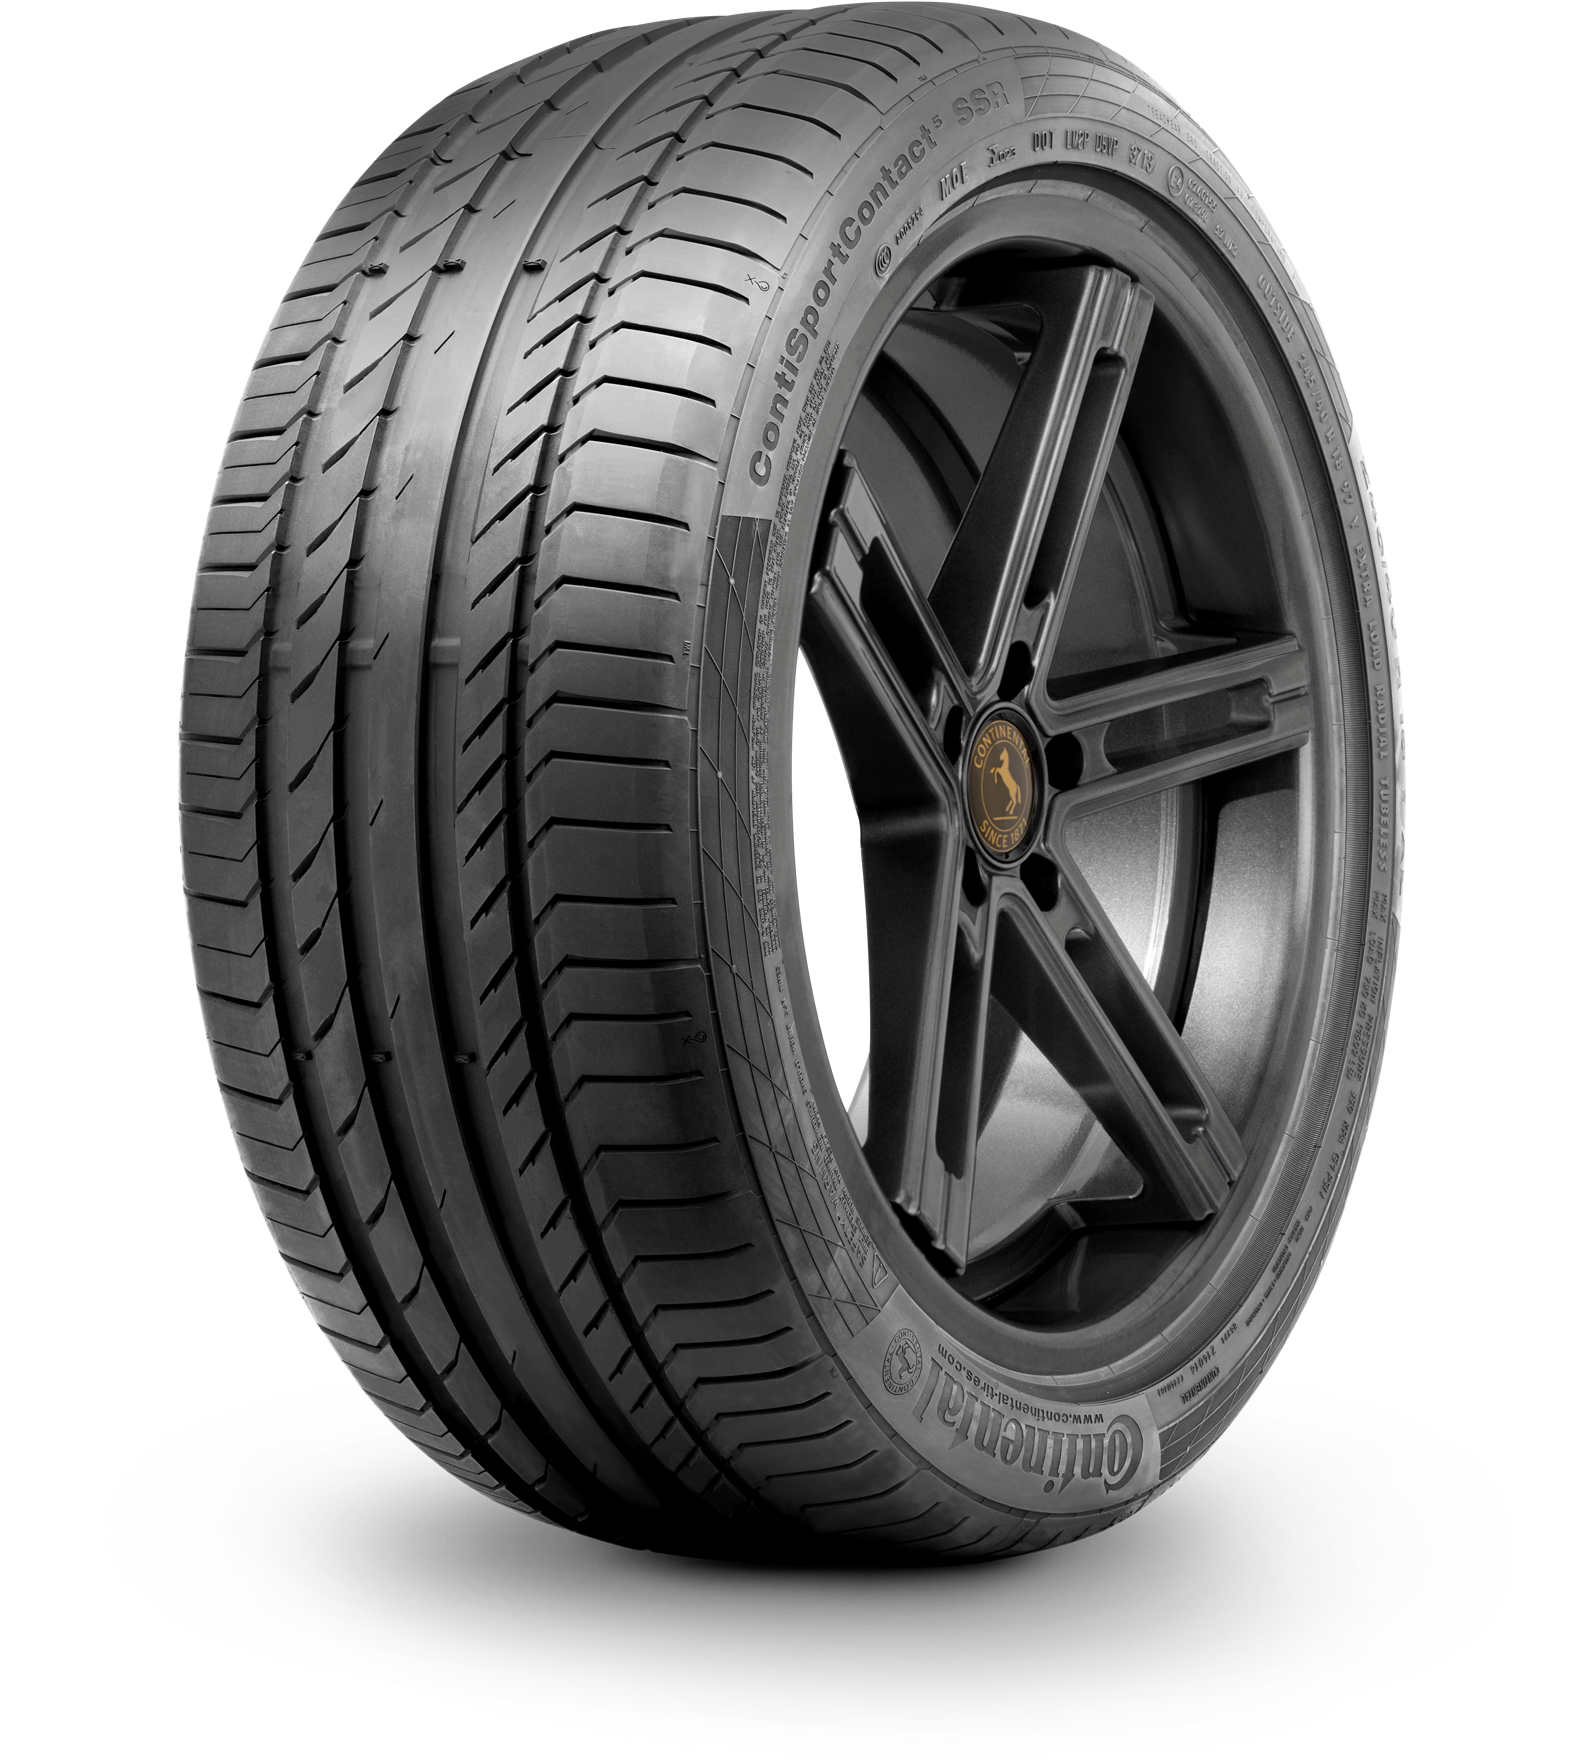 Continental ContiSportContact 5P G/A/75 Passenger Car Summer tyre 295/30 R19 100Y XL RO1 